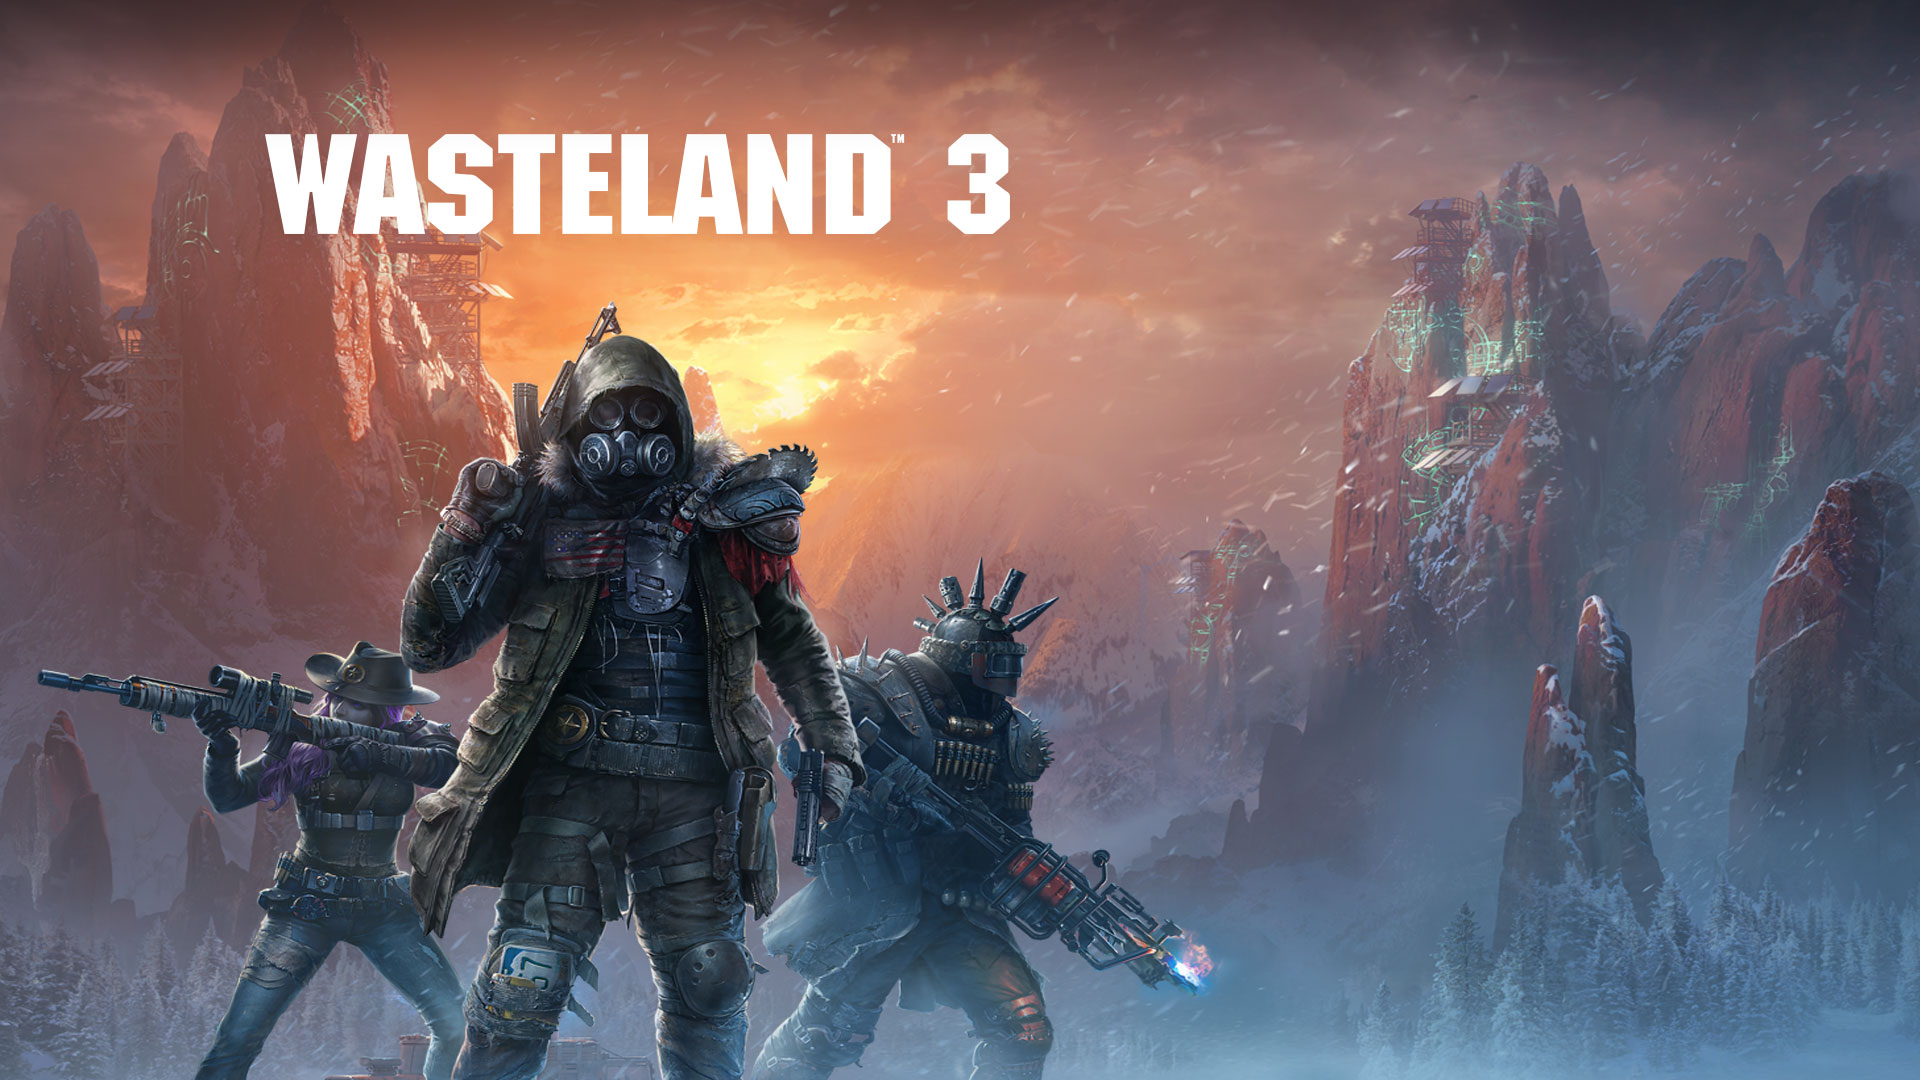 Wasteland 3, 3 heavily armed characters in a snowstorm wearing gas masks